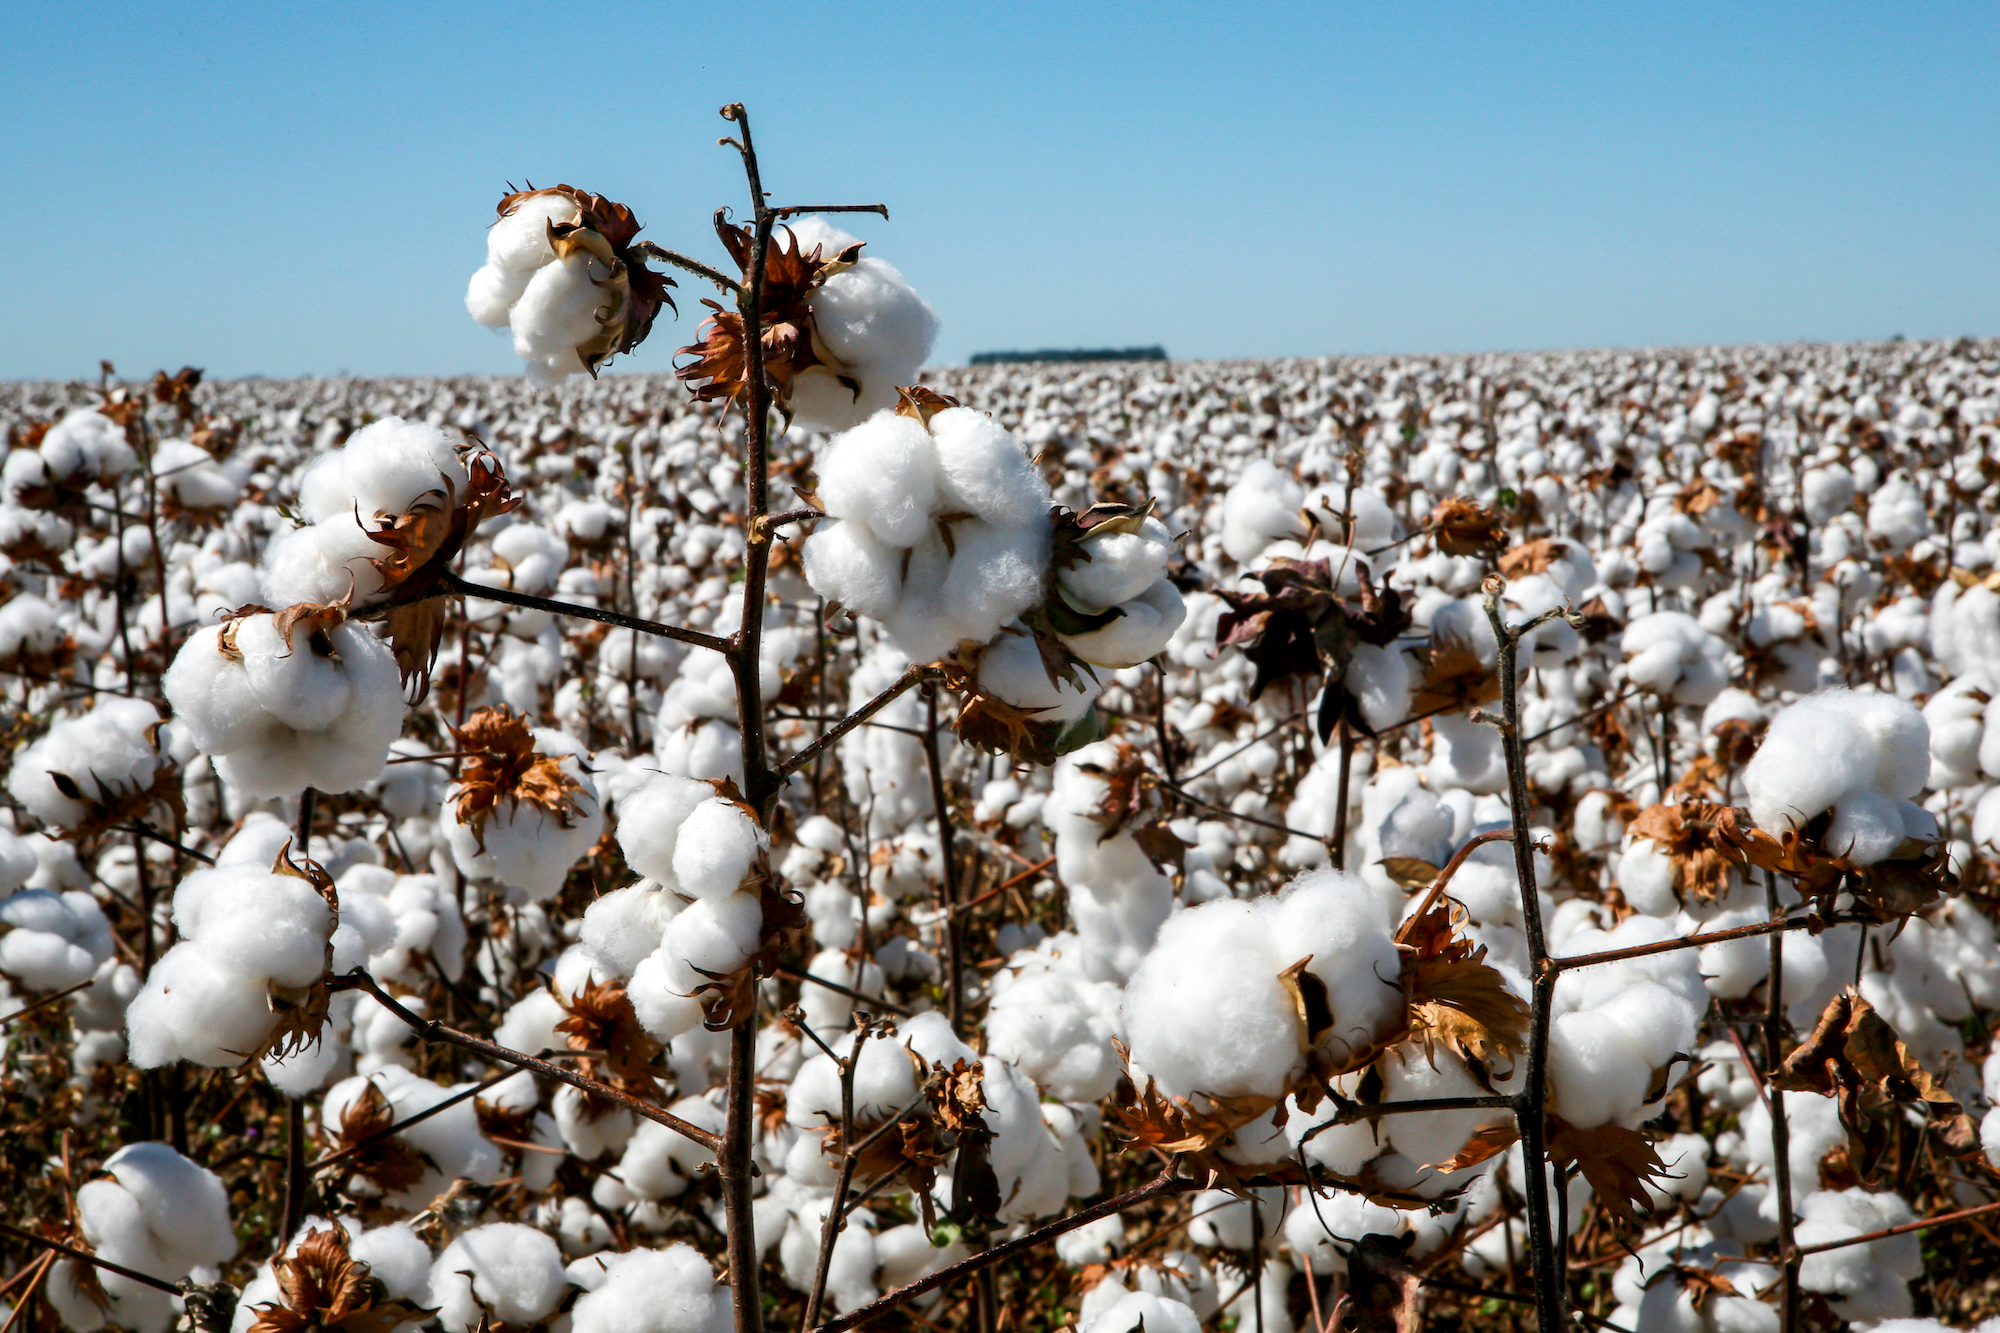 Brazil looks set to become the world’s top cotton exporter